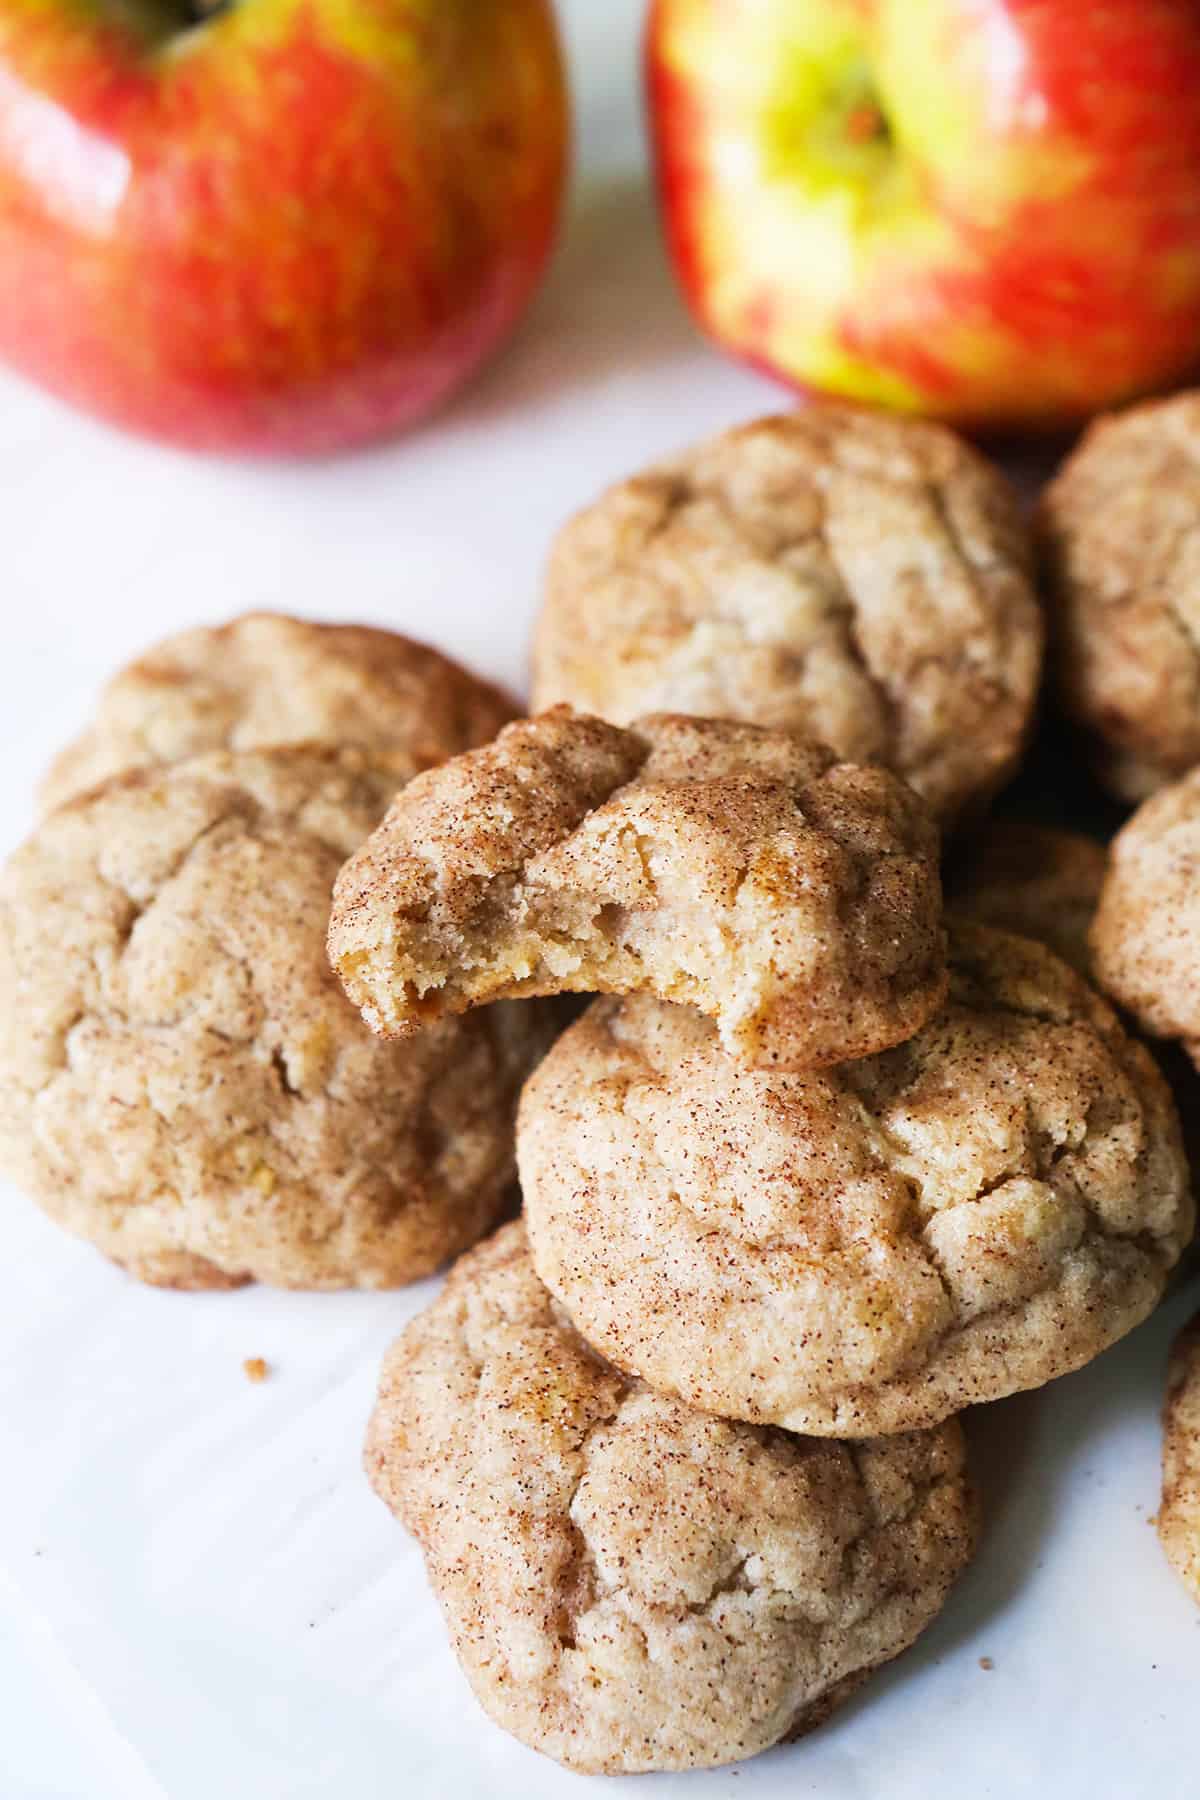 Pile of apple snickerdoodle cookies covered in sugar and cinnamon.